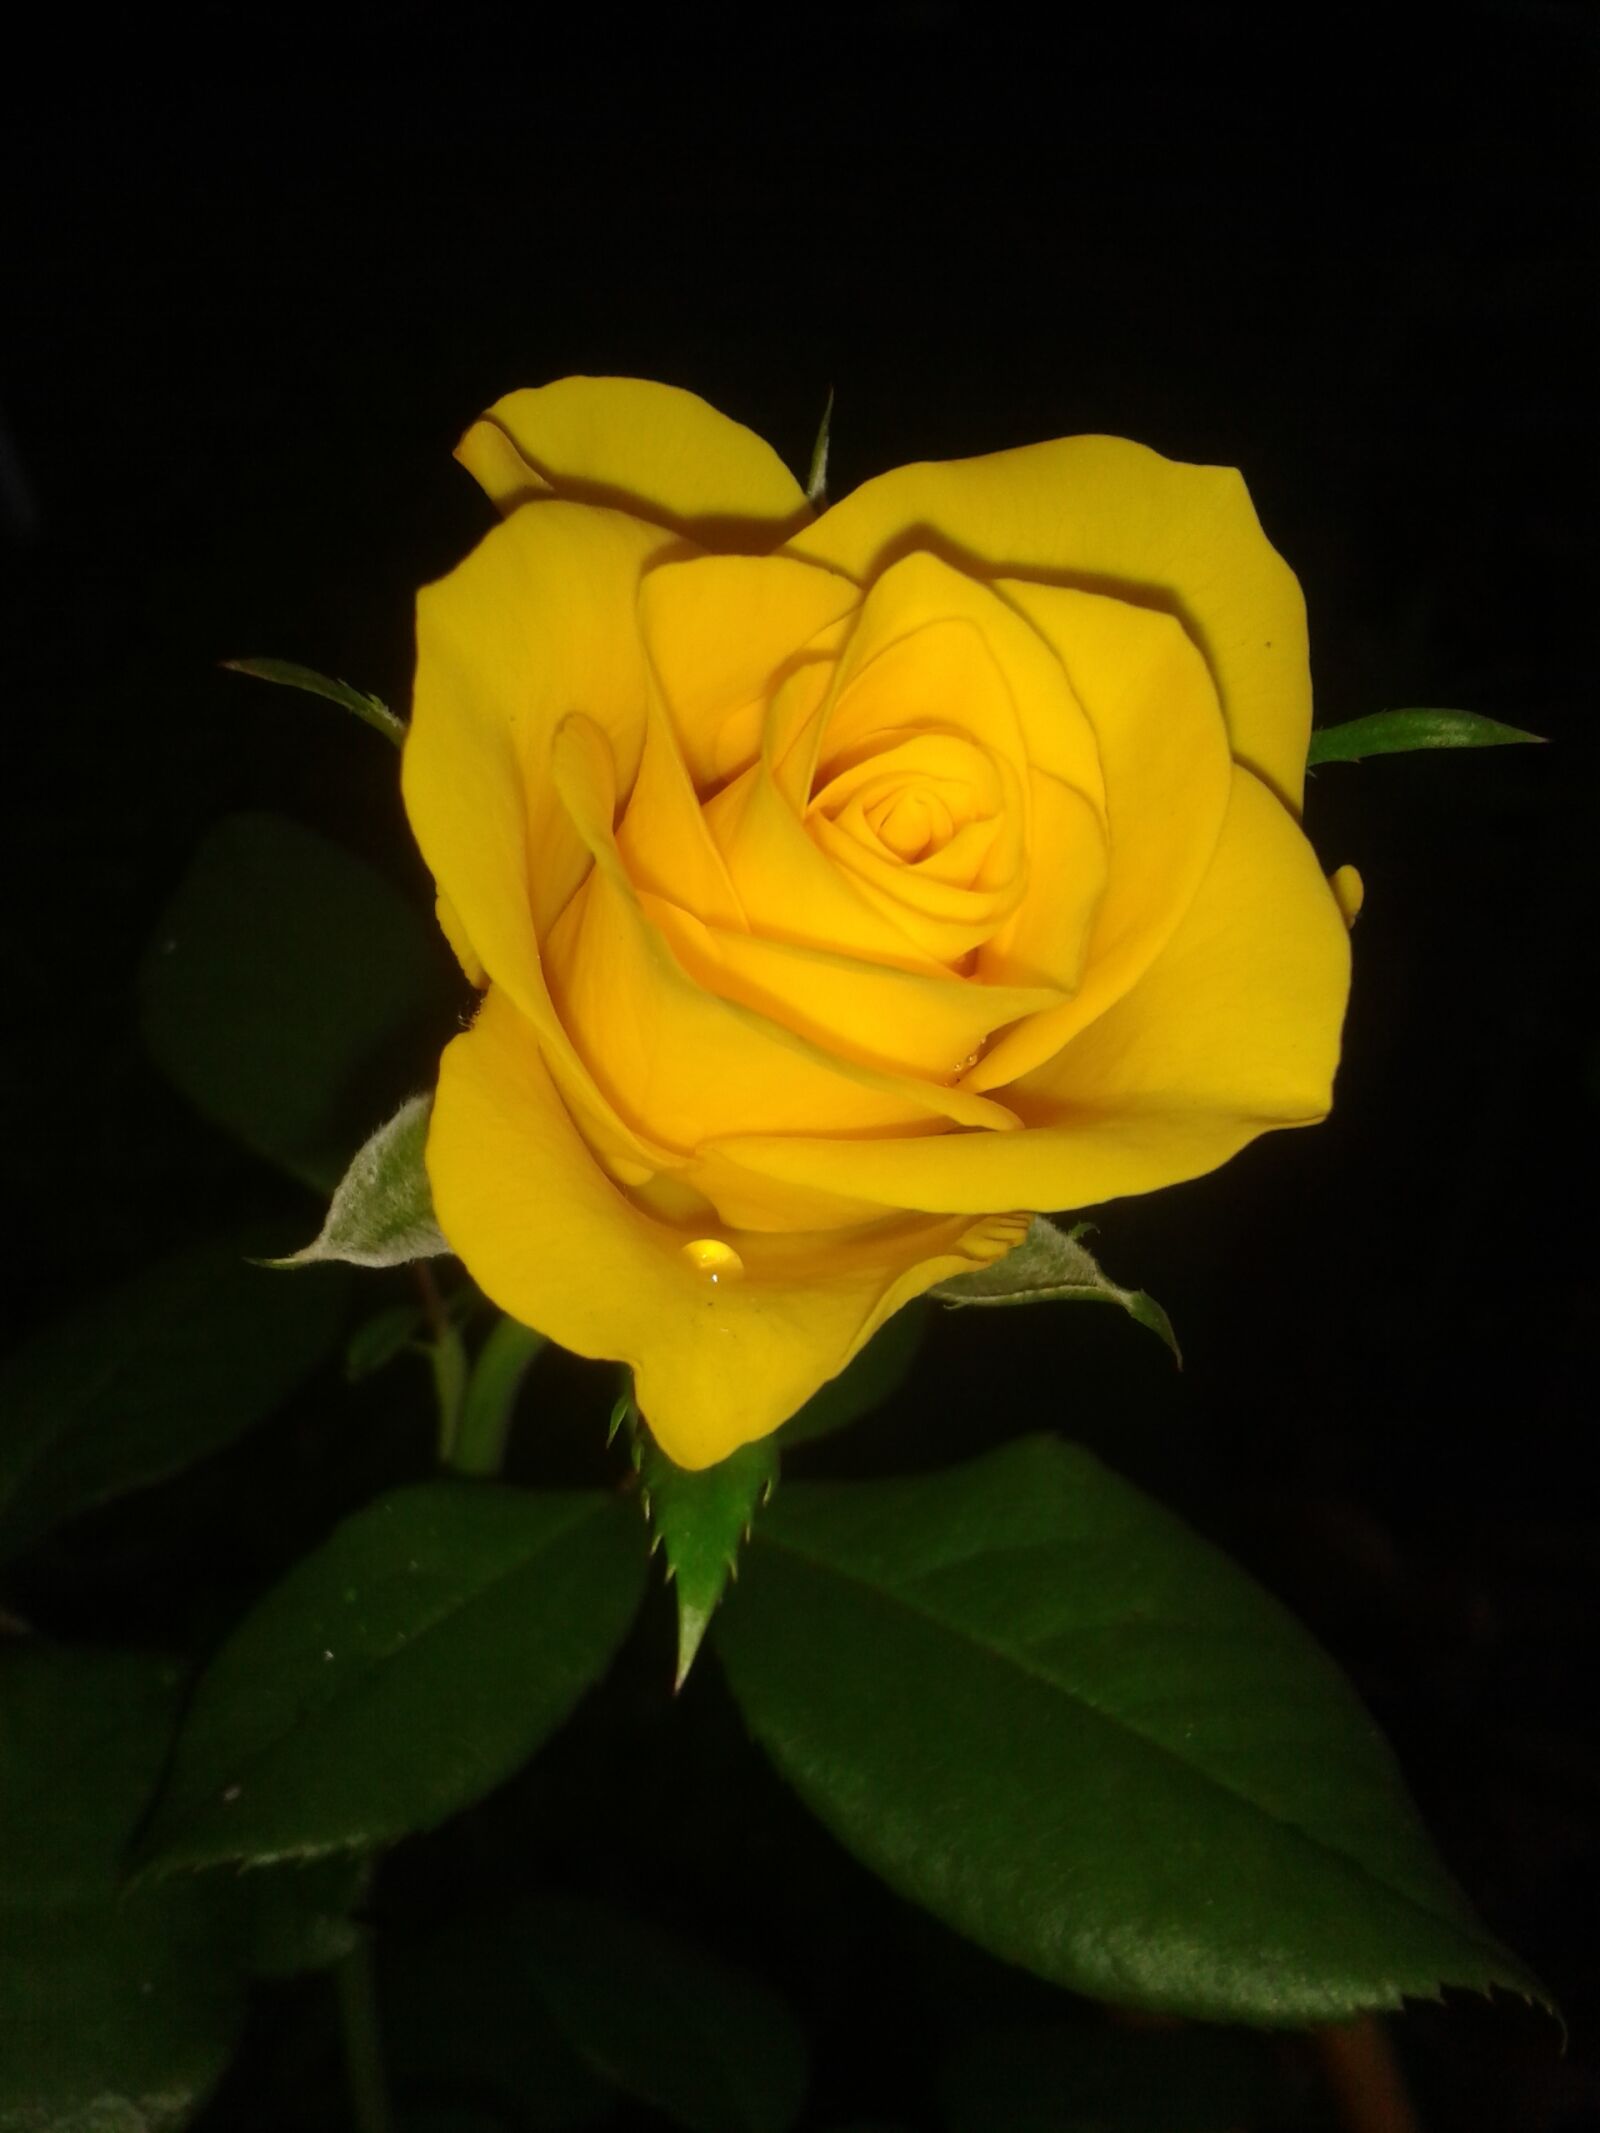 Samsung Galaxy Trend Plus sample photo. Plant, rose, yellow photography